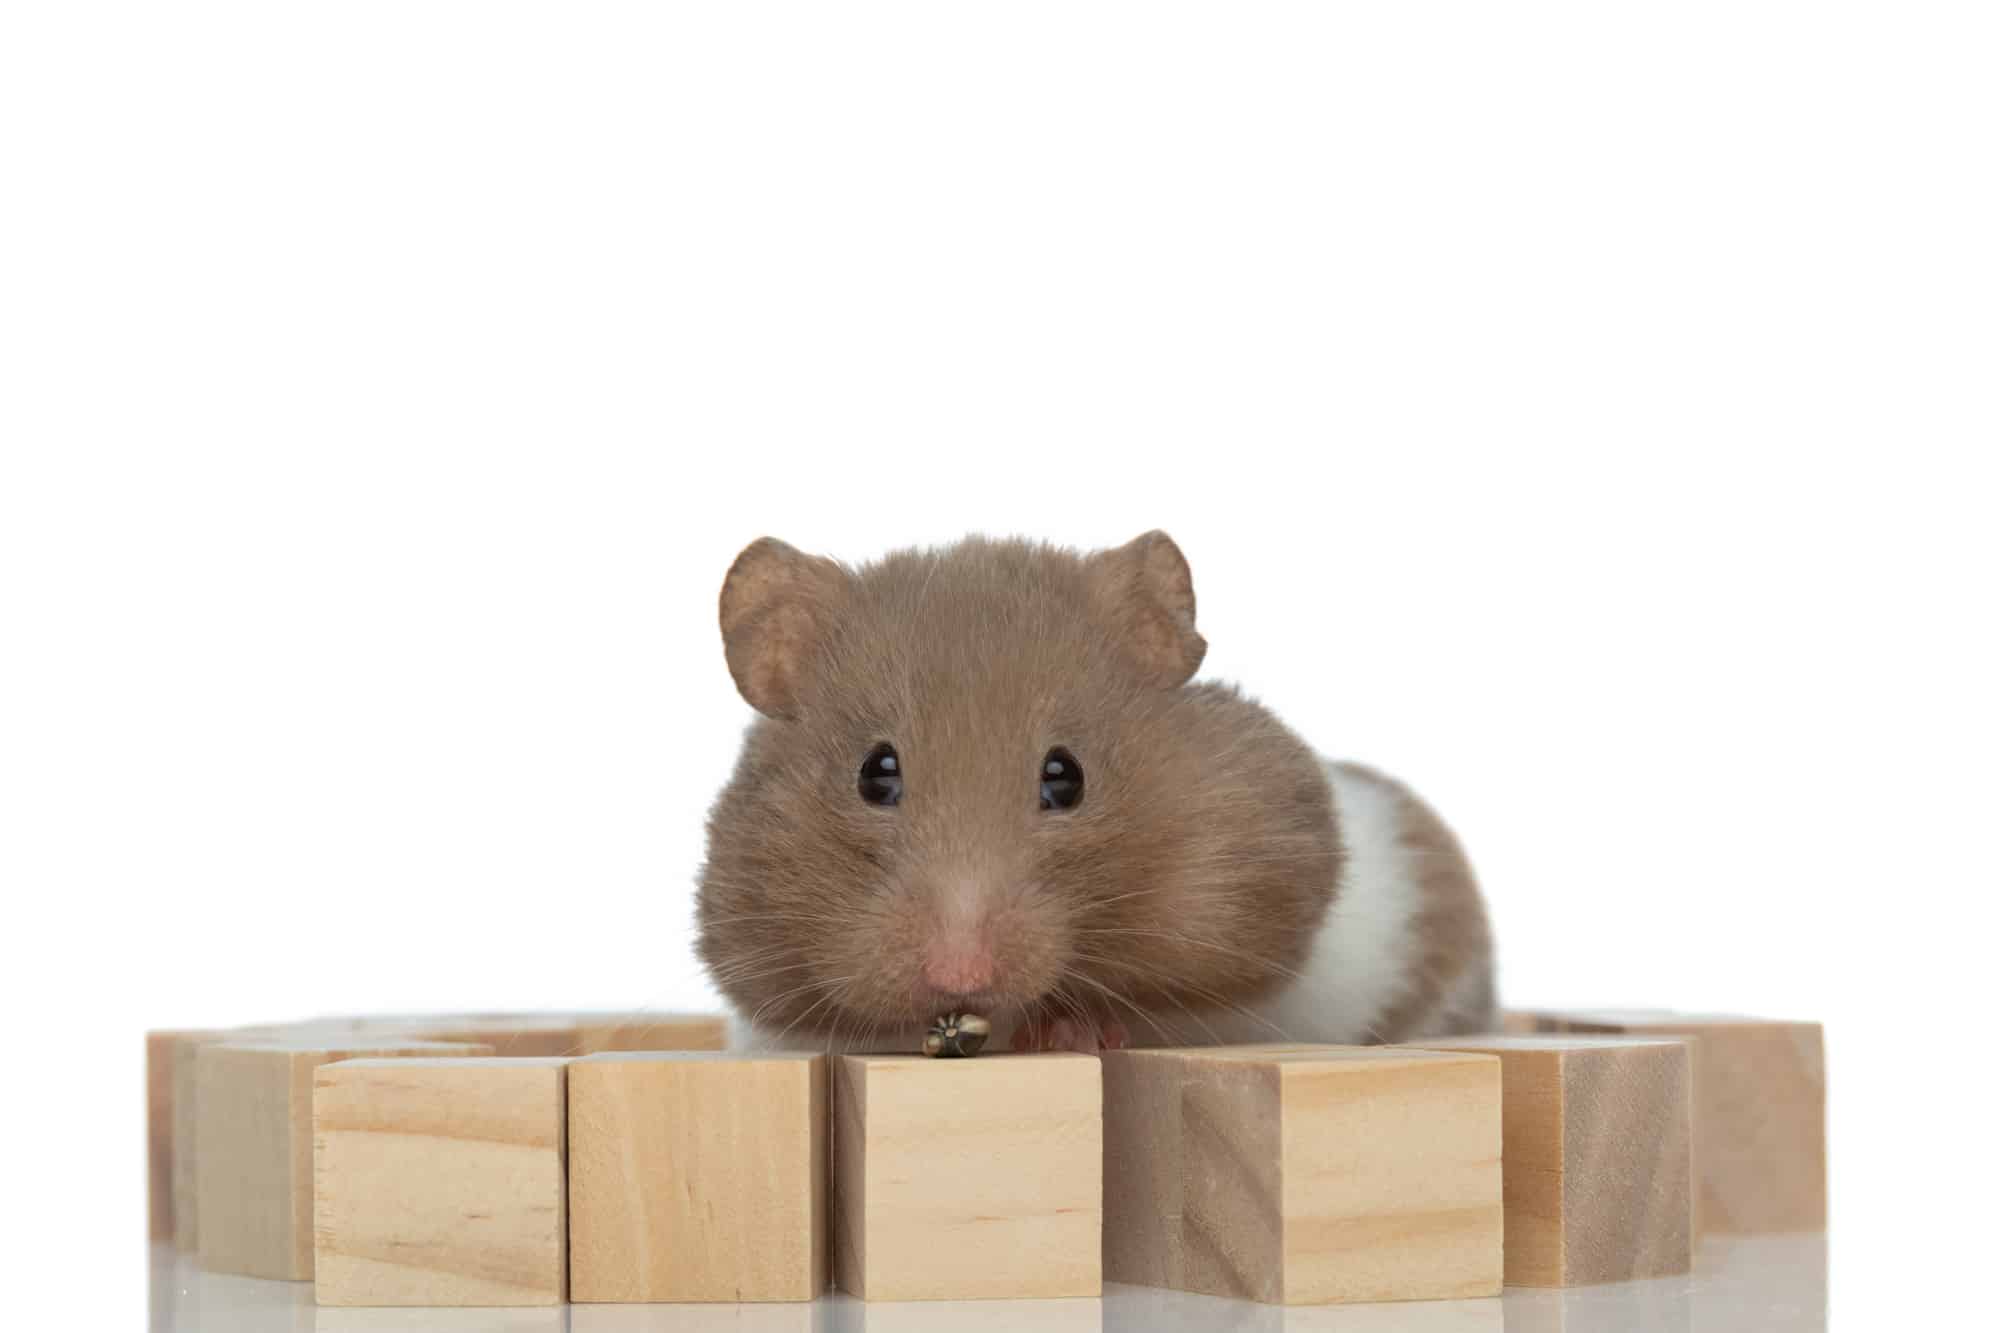 A Syrian hamster on cubes of wood